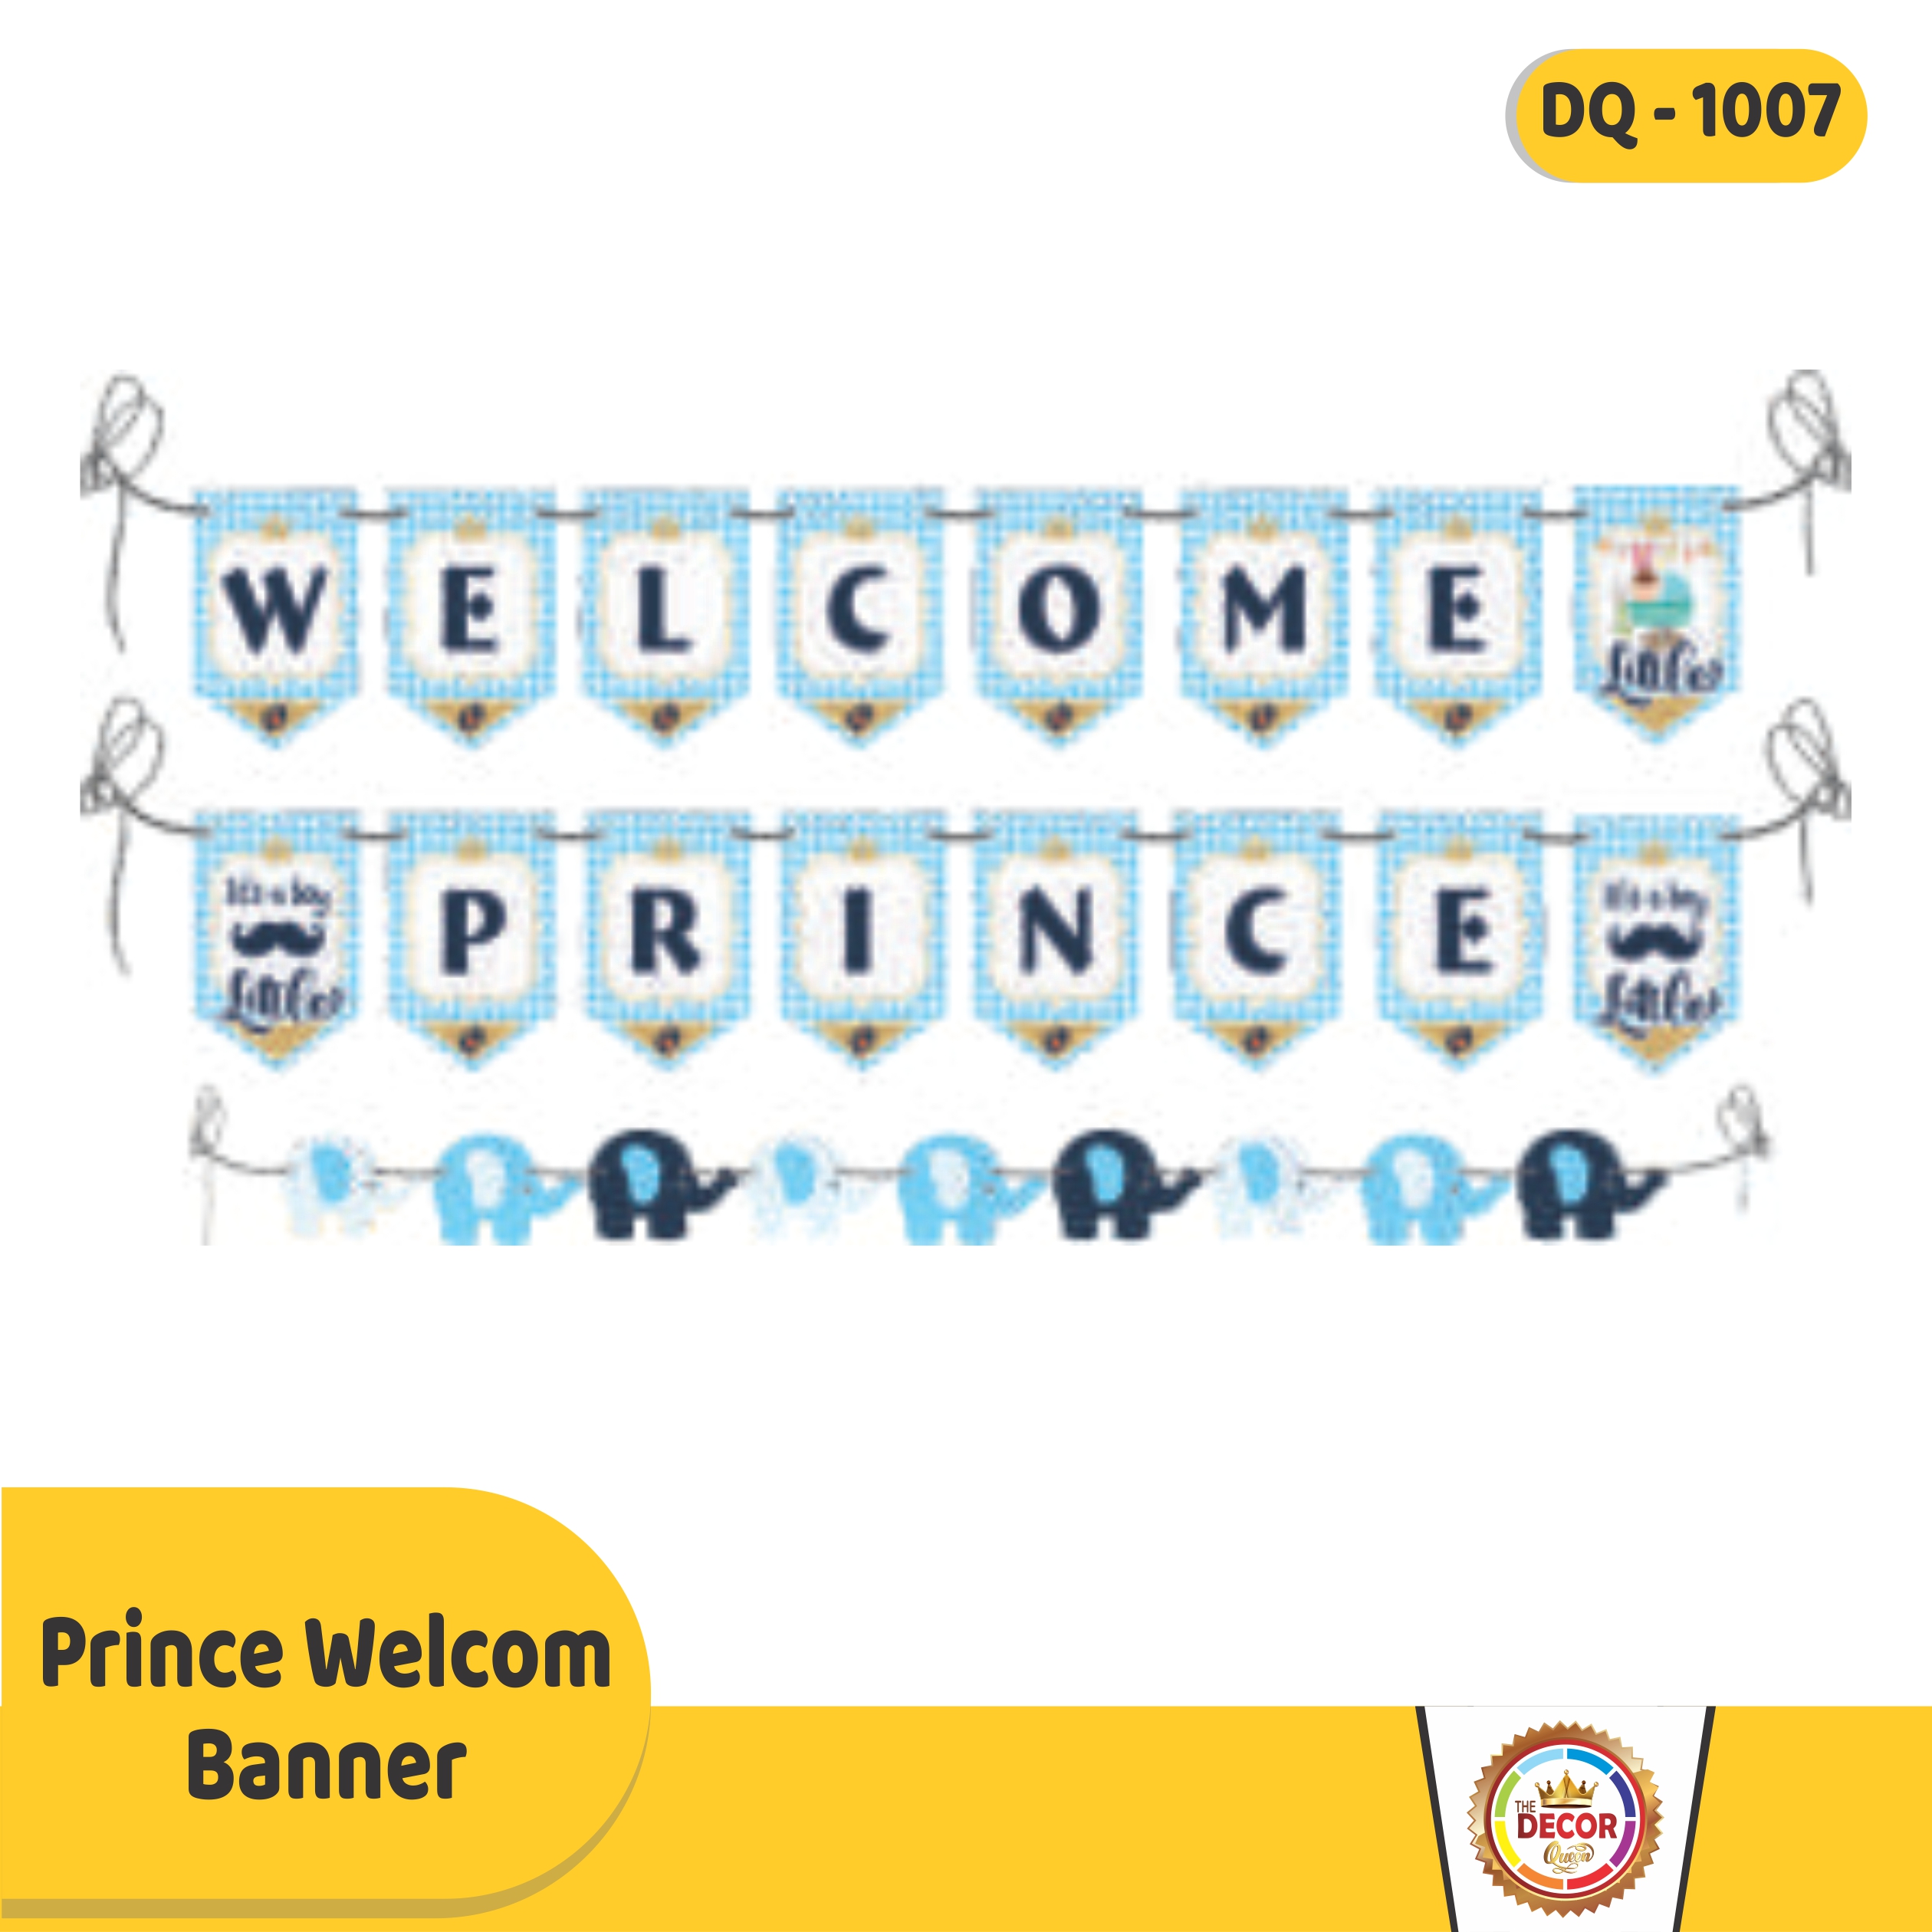 Prince Welcom  Banner|Banners|Other Banners